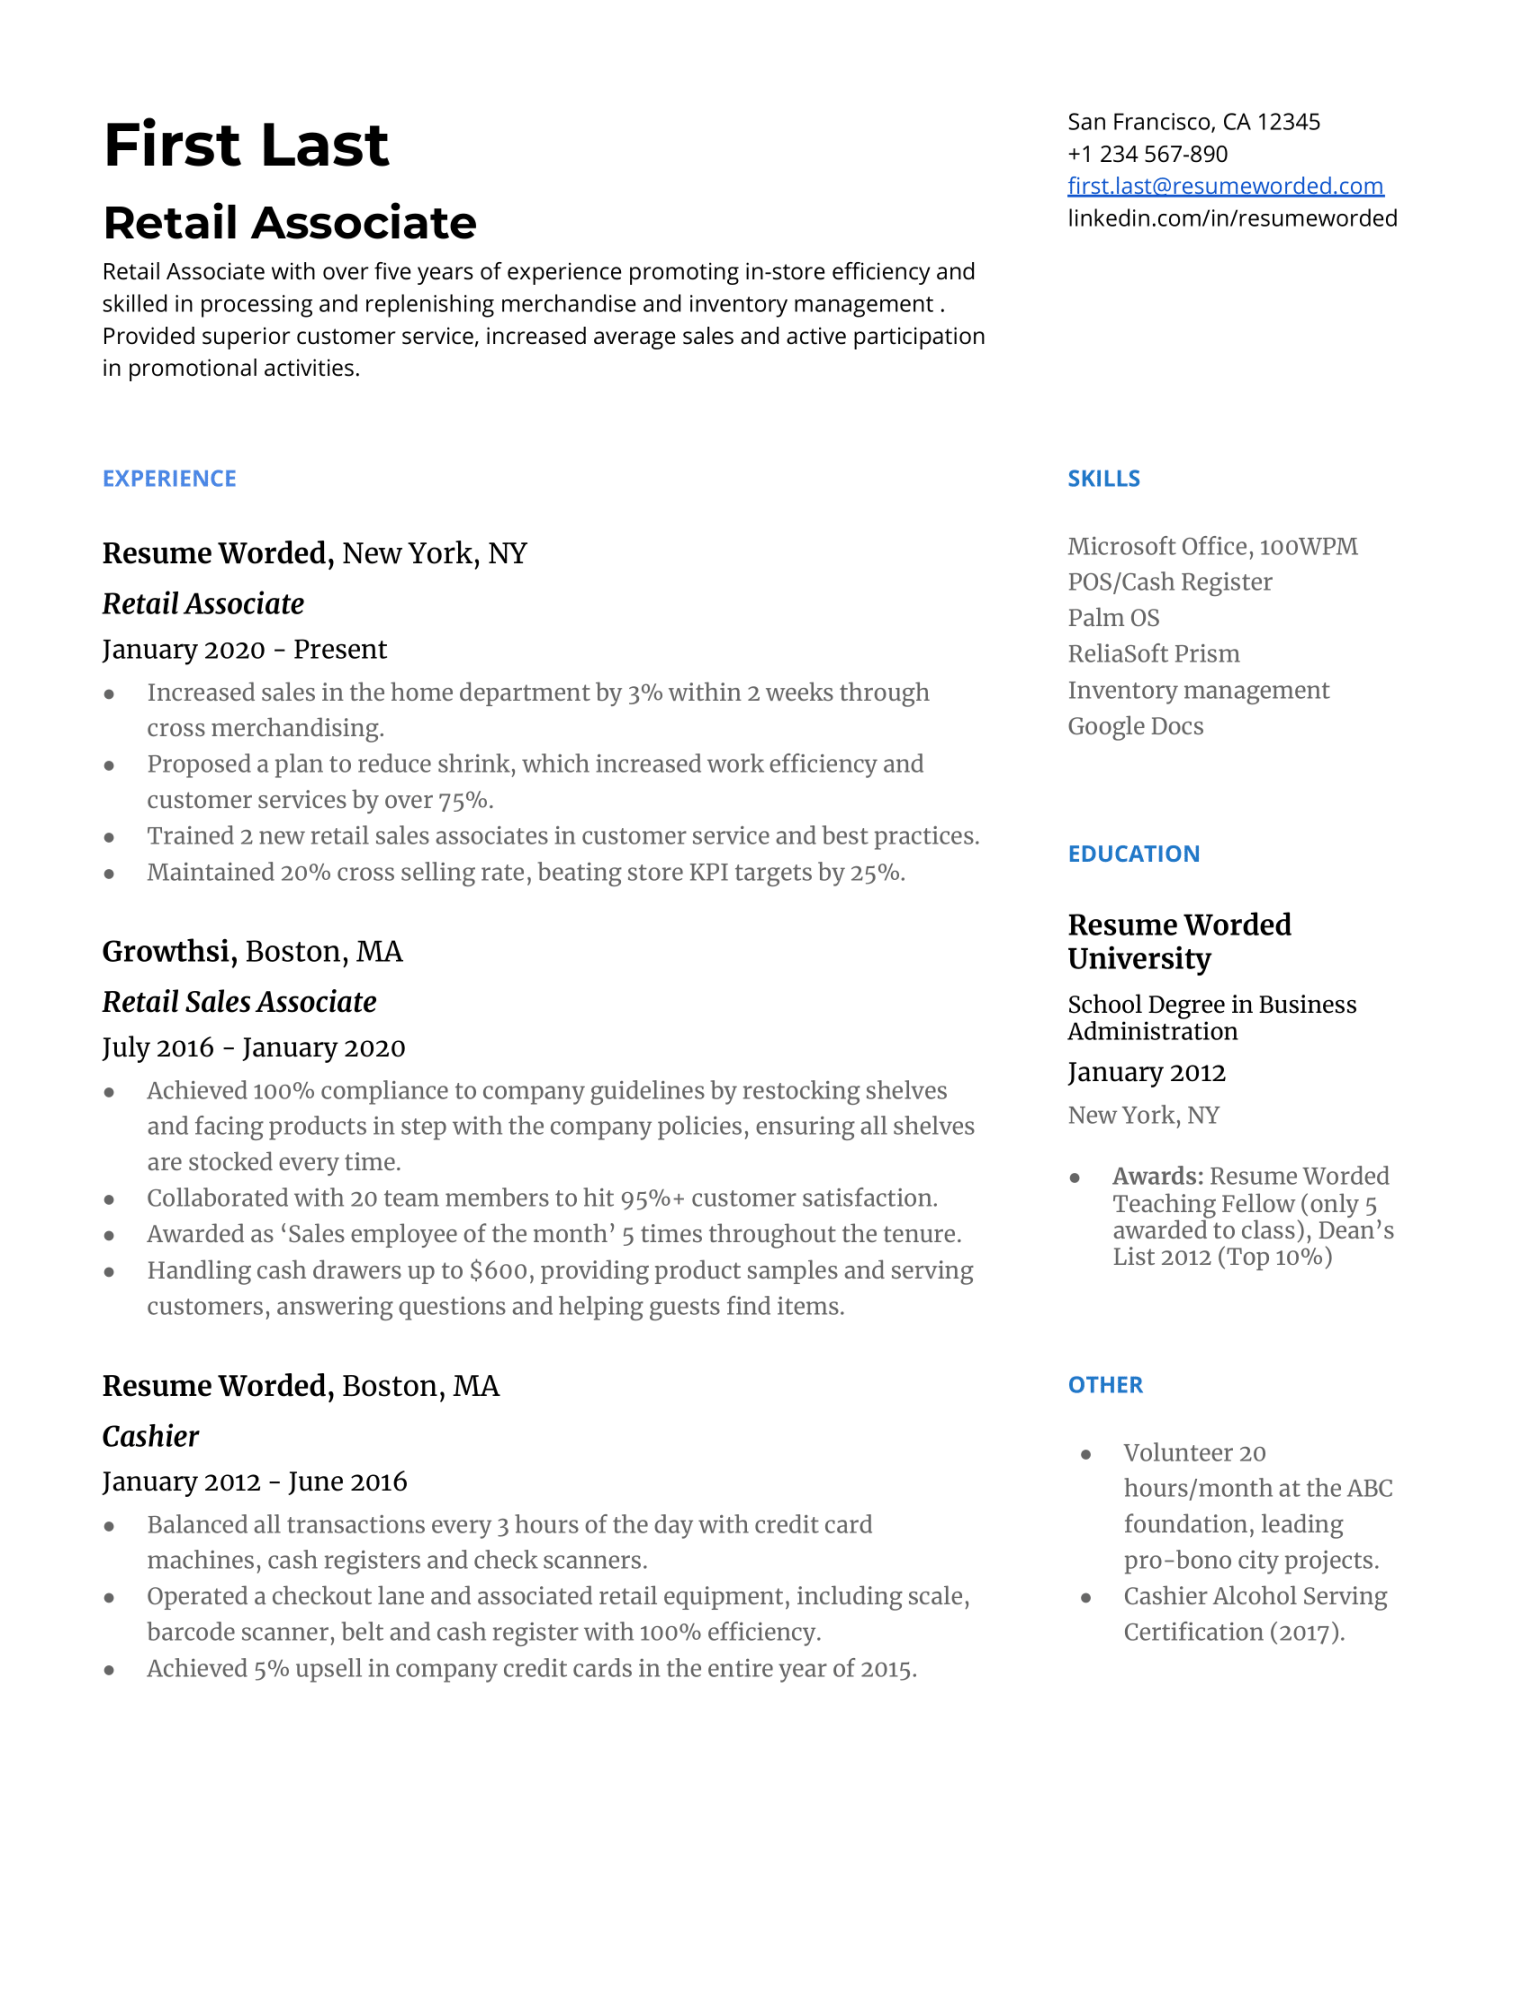 Retail Resume Examples for   Resume Worded